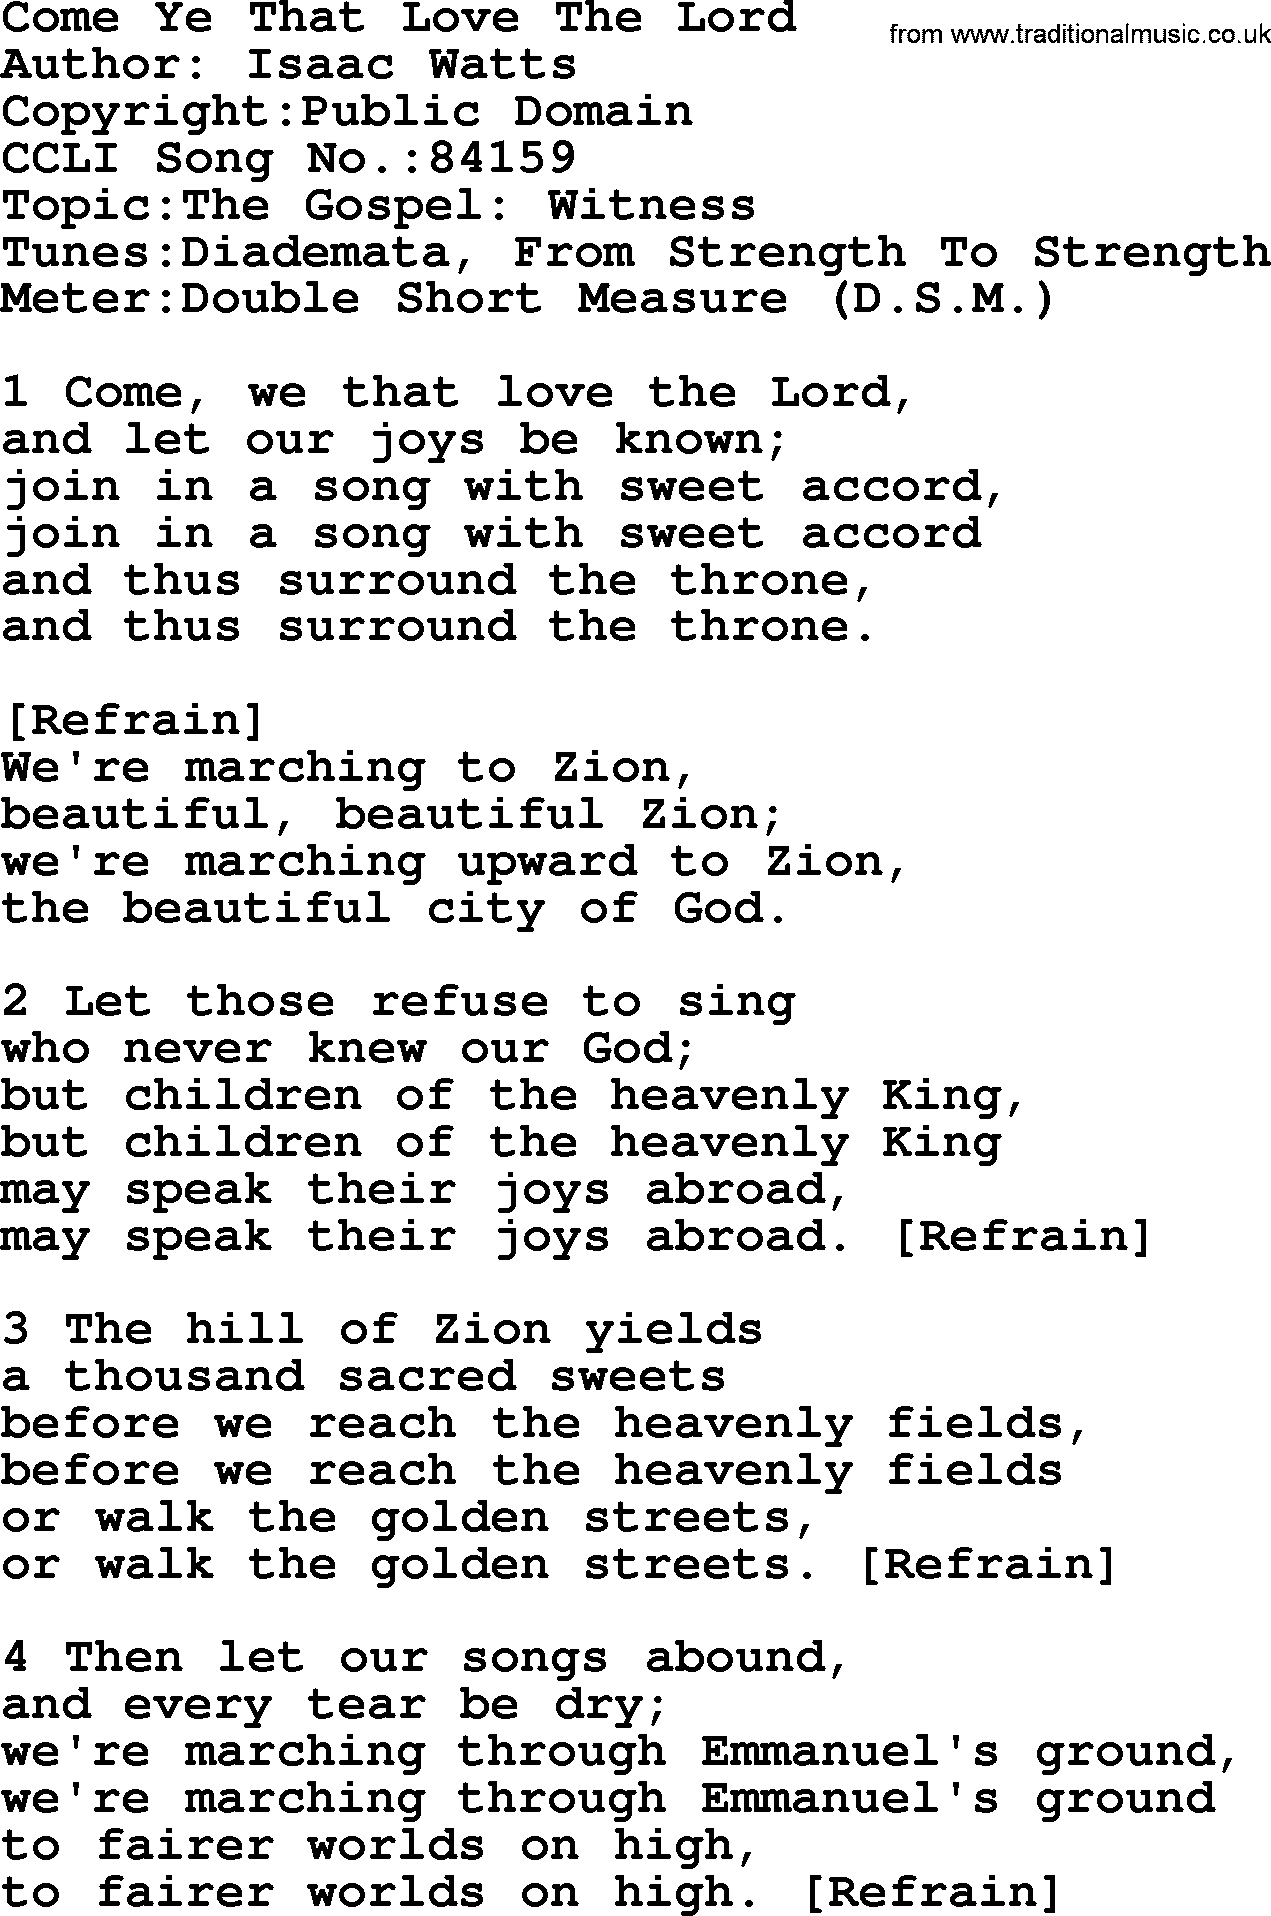 A collection of 500+ most sung Christian church hymns and songs, title: Come Ye That Love The Lord, lyrics, PPTX and PDF